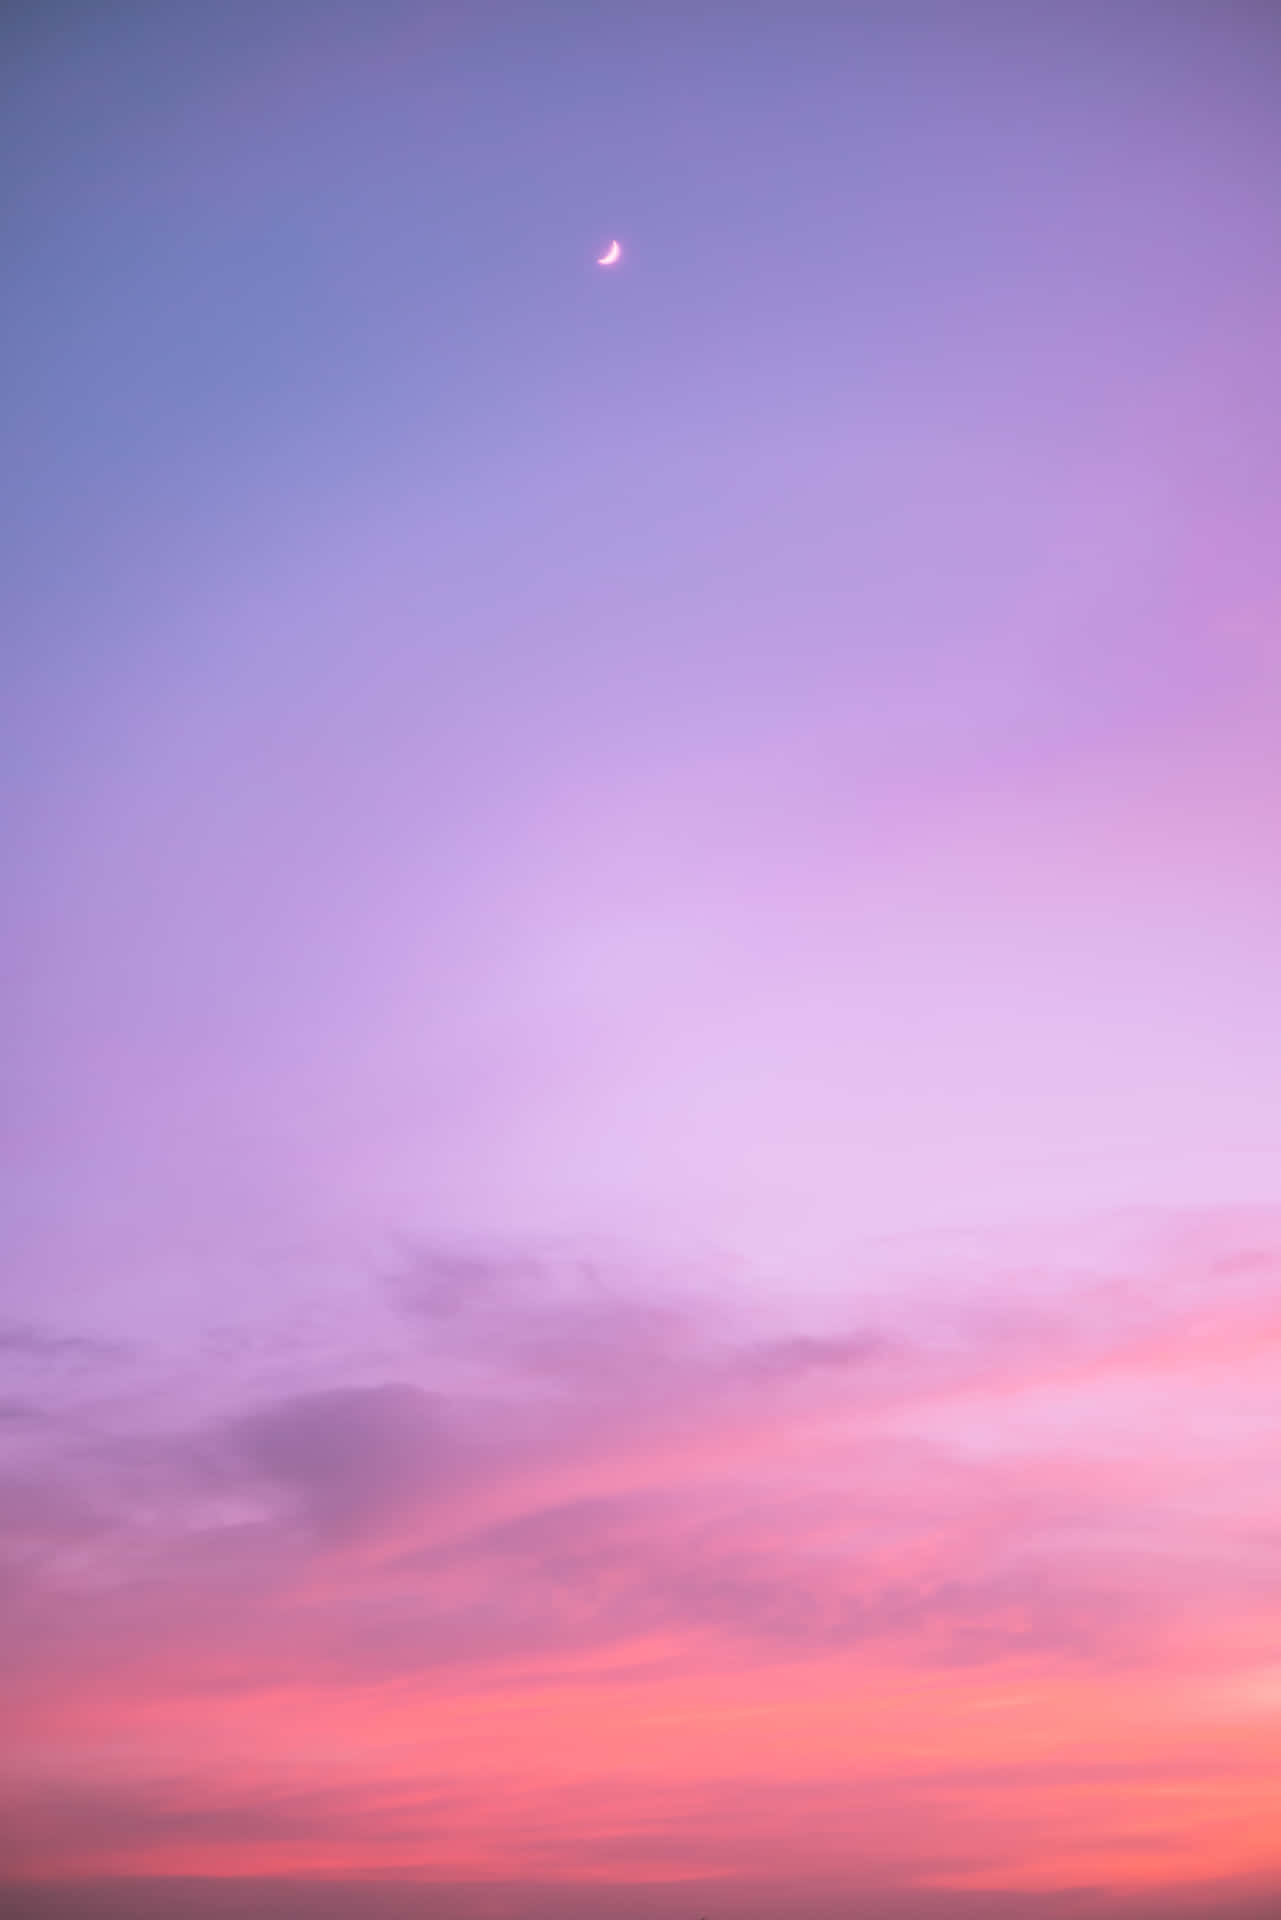 Pink Beach Sunset With The Moon Wallpaper